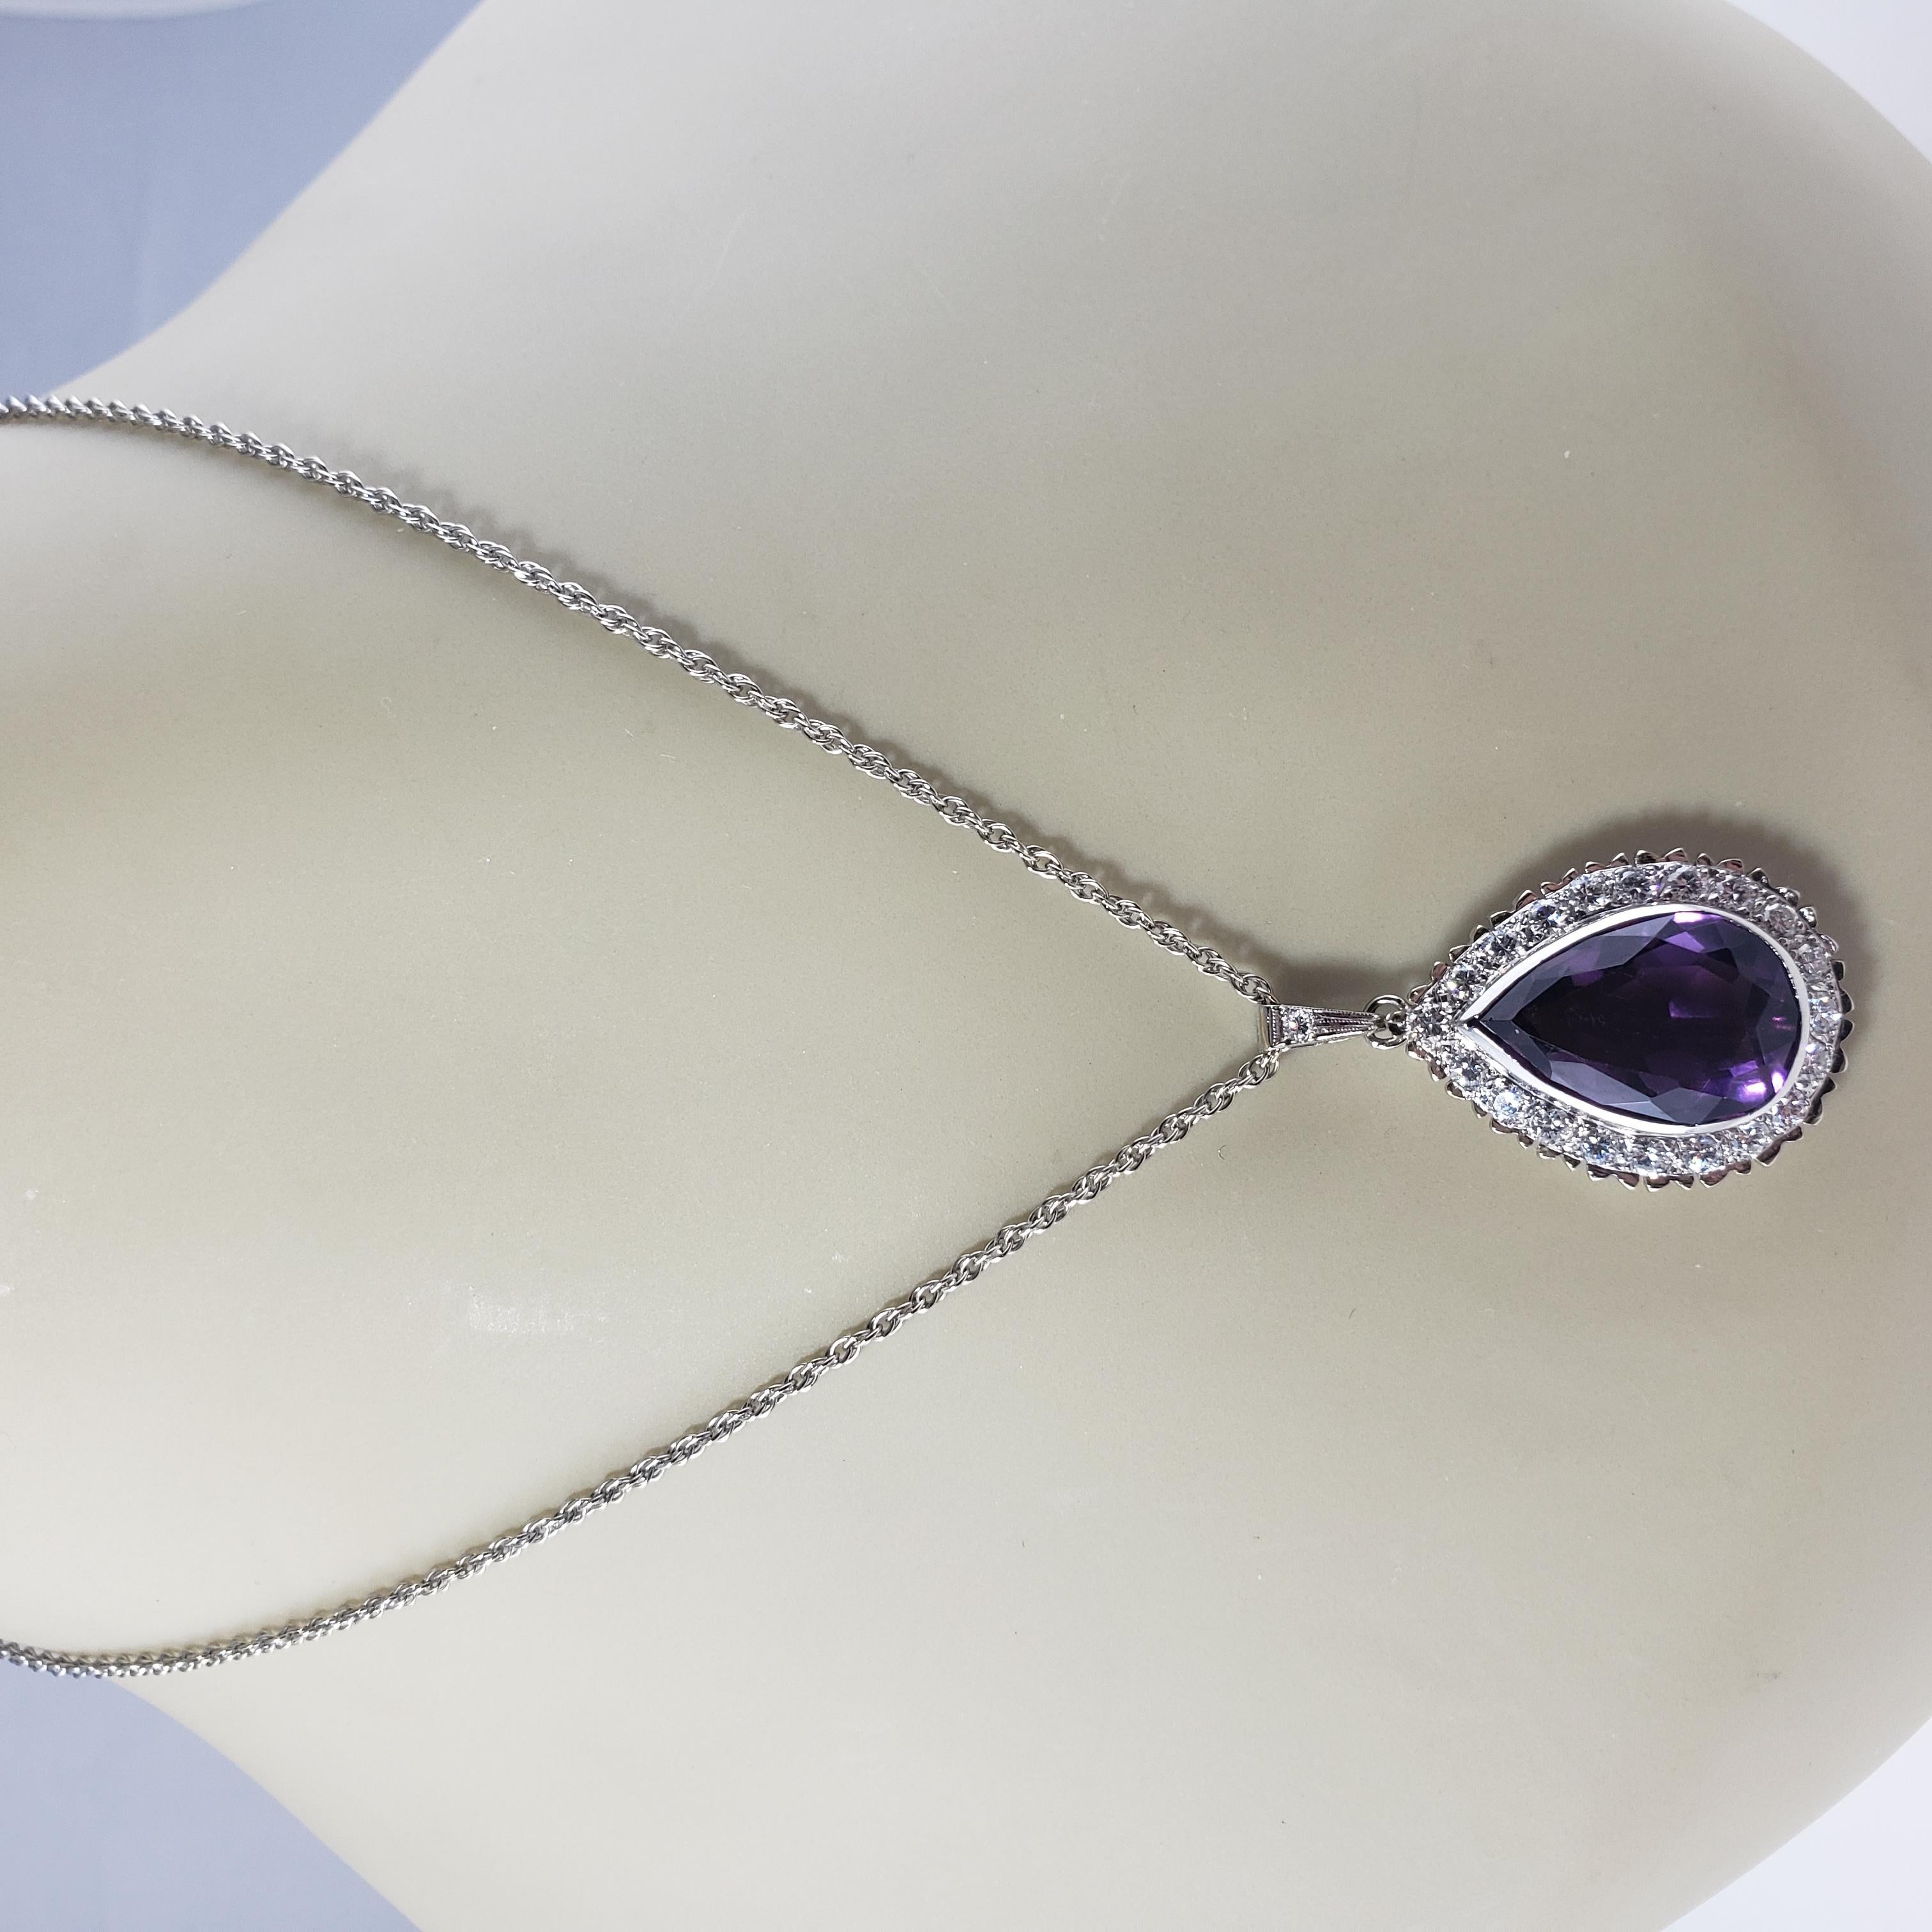 14 Karat White Gold Amethyst and Diamond Pendant Necklace #13737 For Sale 5